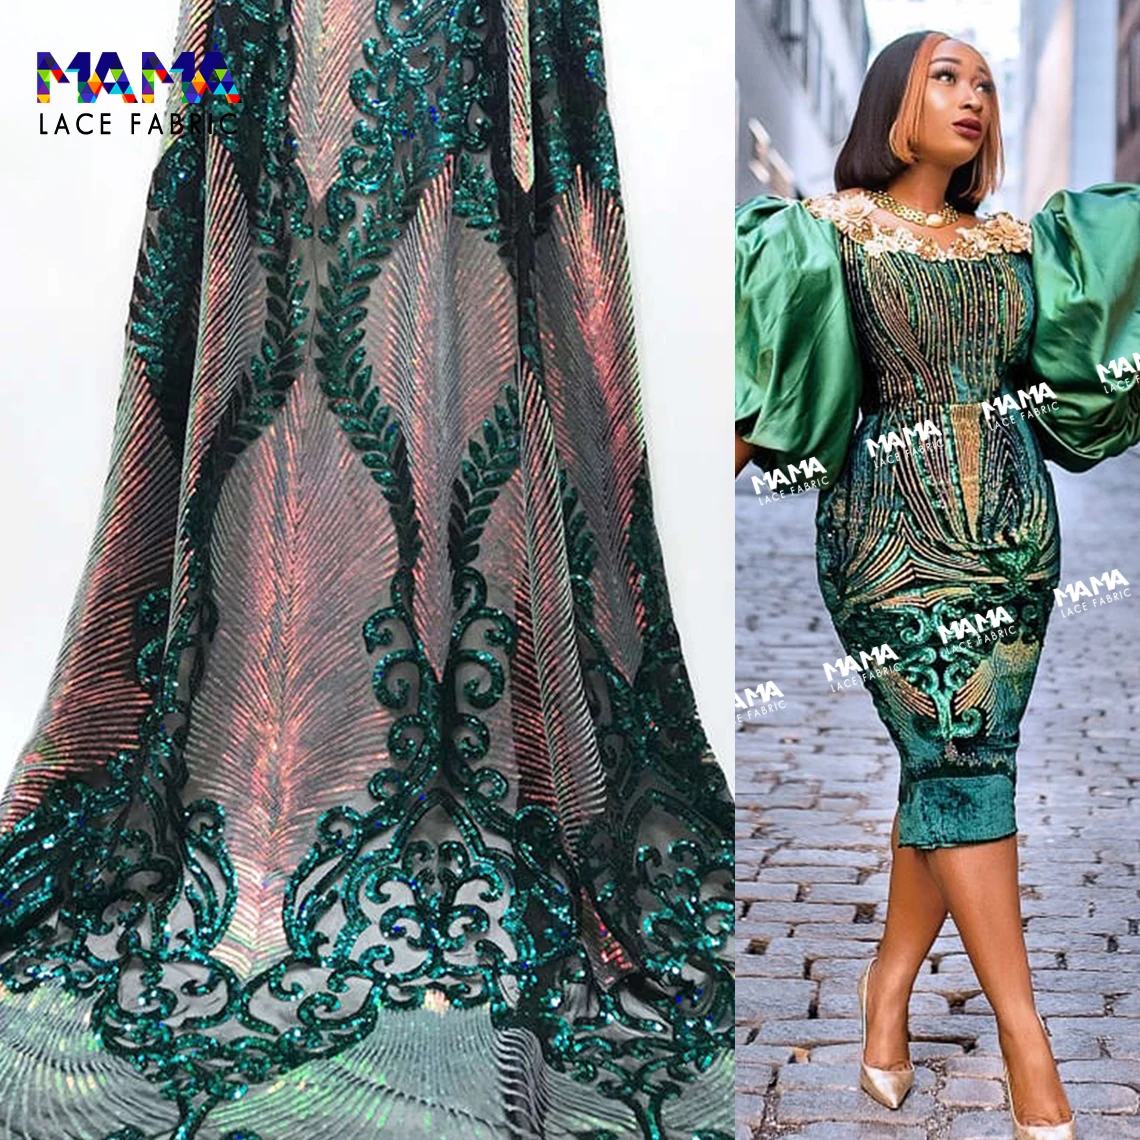 5 Yards Green Color African Indian Gradient Sequins Net Lace Fabrics Guinea Gold Sequined Mesh Wedding Bride Dress DIY Material